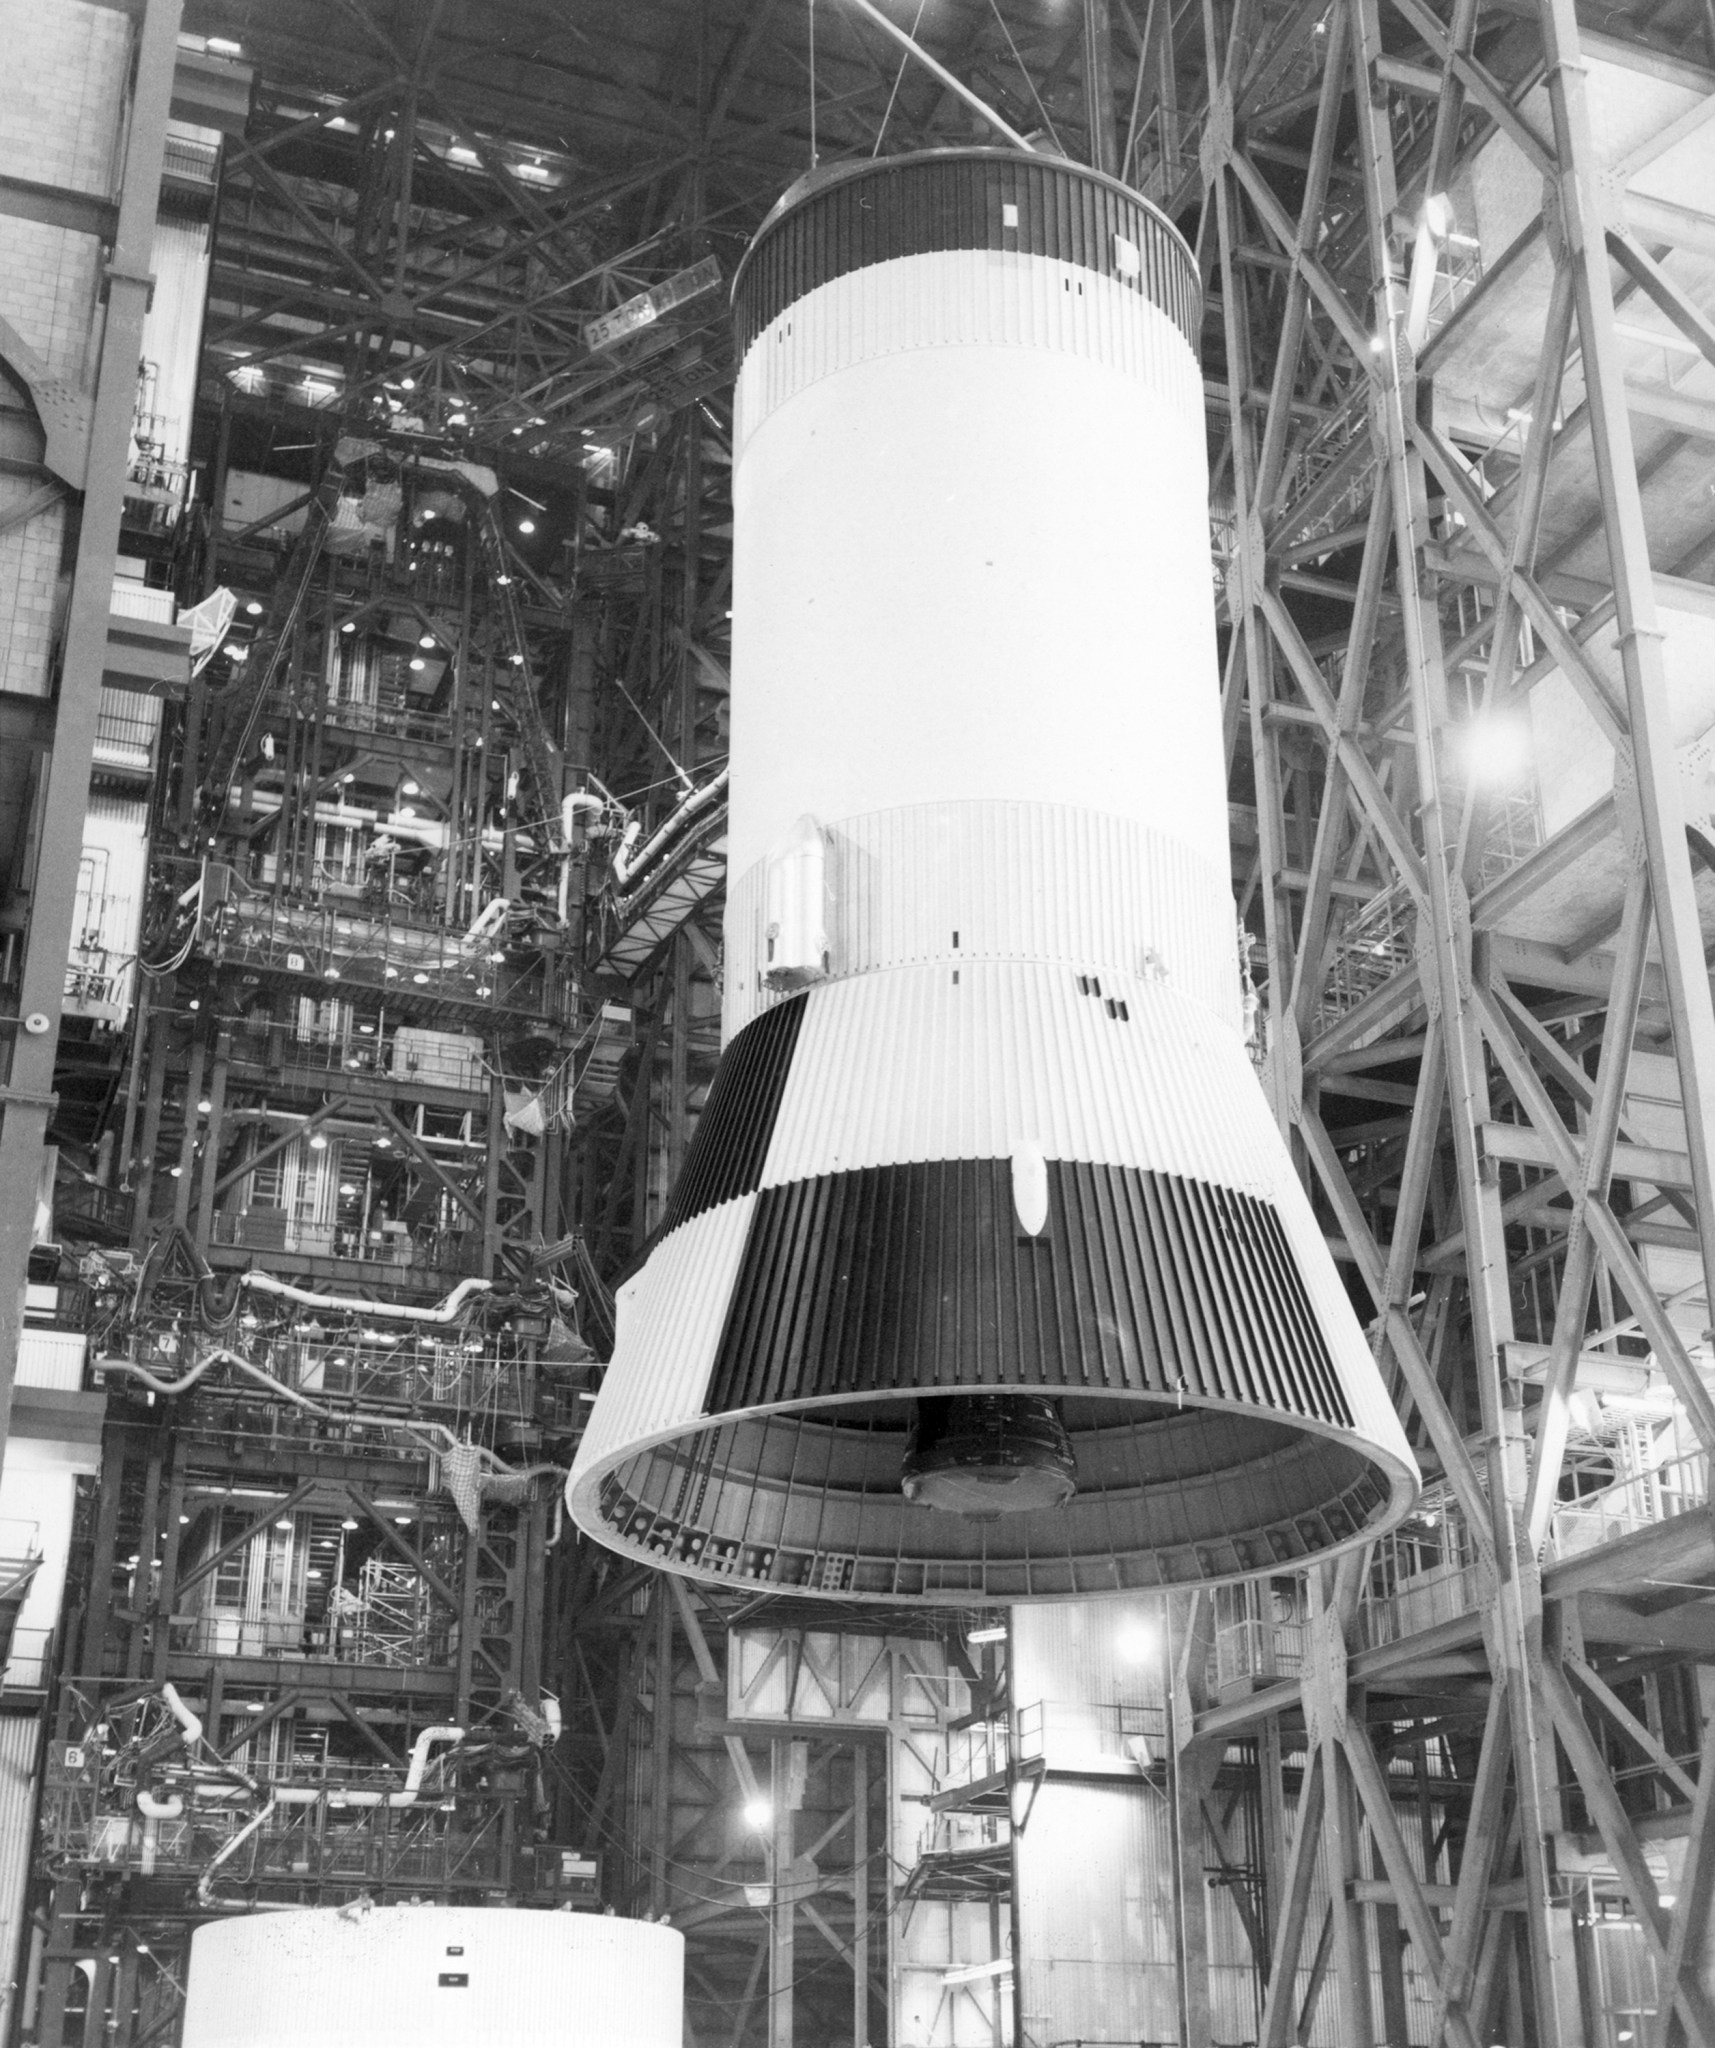 This week in 1967, the Saturn V third stage, S-IVB-209, was successfully static-fired for a mainstage duration of 465 seconds.